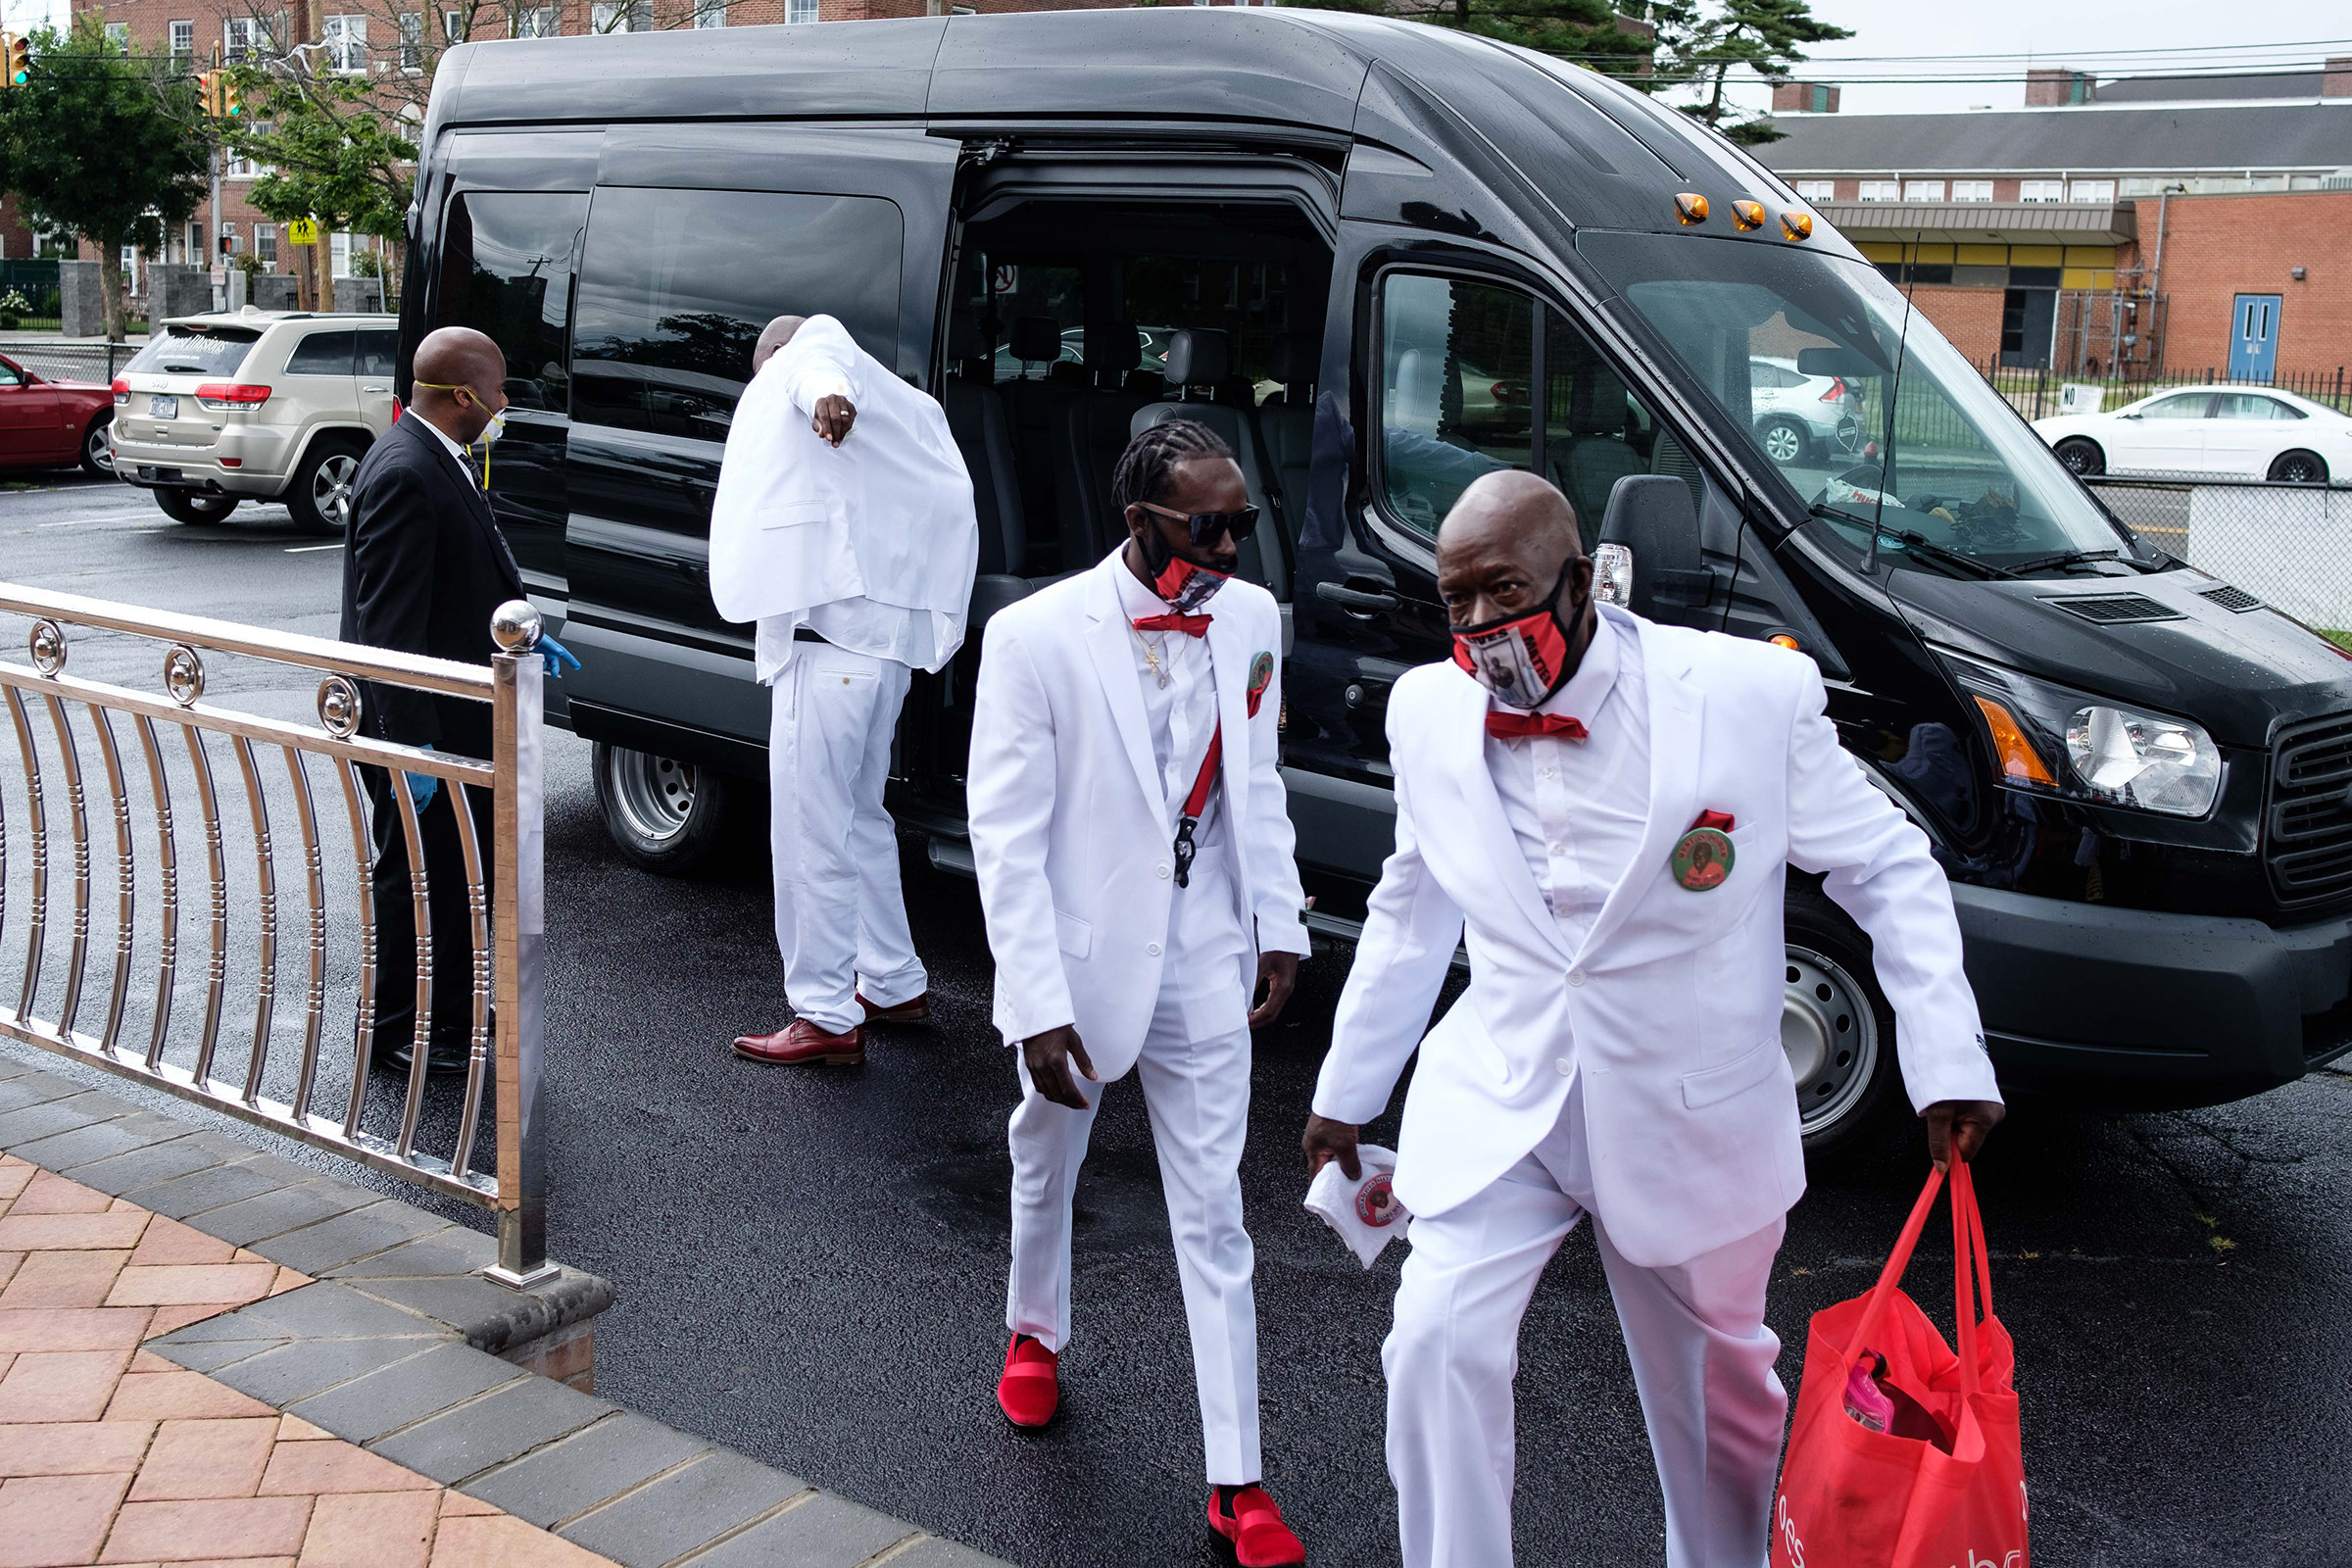 Jamel Floyd’s father and brothers arrive at Judea United Baptist Church for Jamel's funeral in Hempstead, N.Y., on June 30. (Yuki Iwamura)